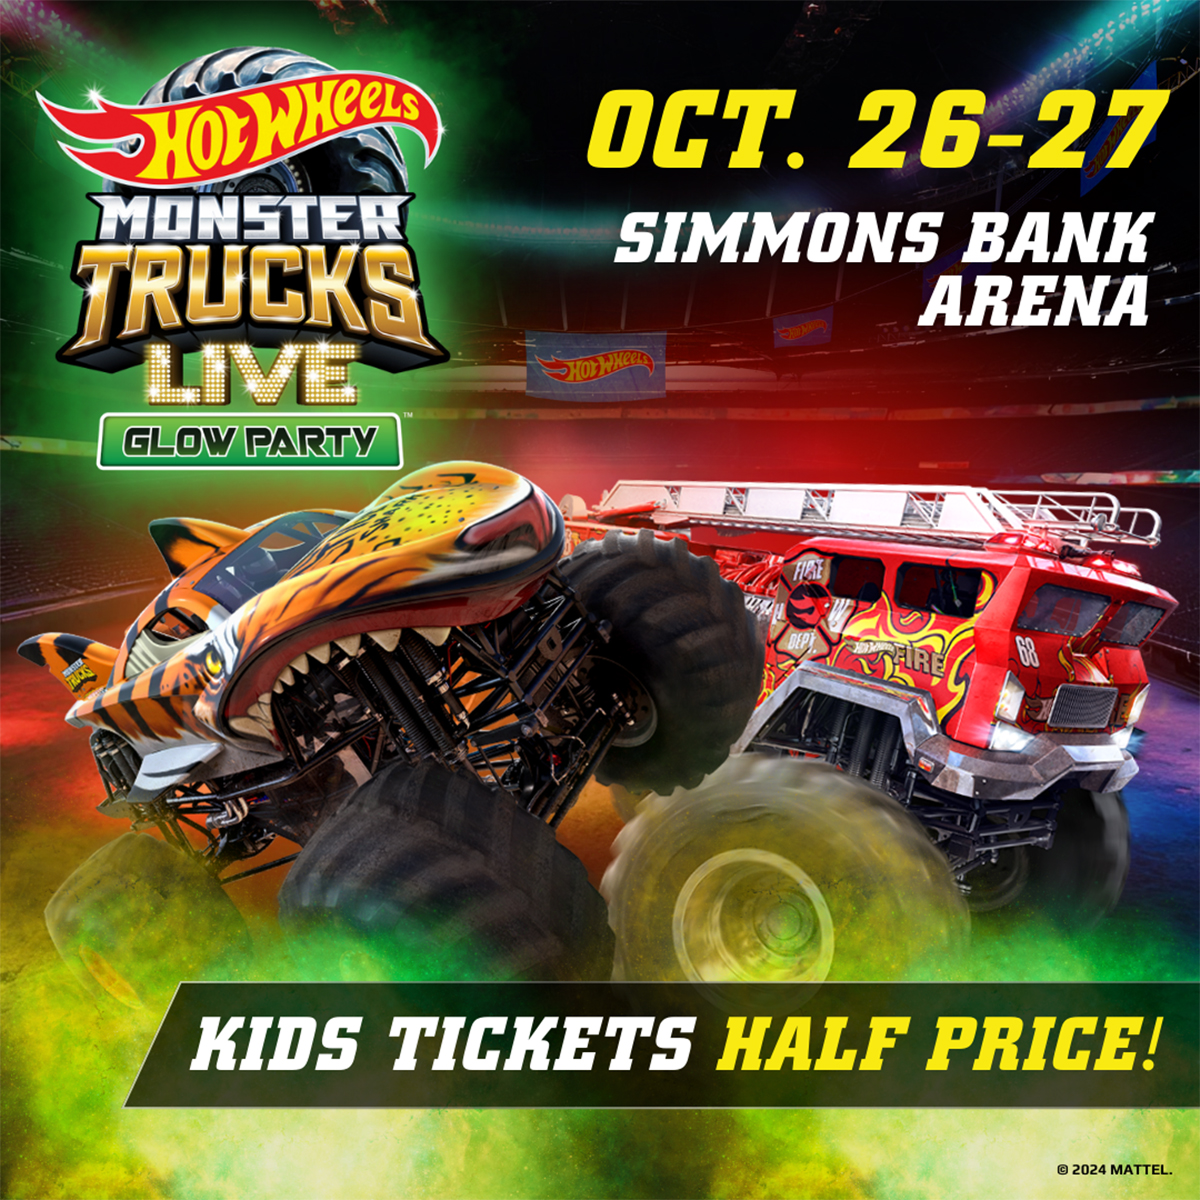 💚🔥 Get ready to see real-life versions of the famous Hot Wheels monster truck toys in the DARK including Mega Wrex, Tiger Shark, Bone Shaker, Gunkster, & more! ⭐ Hot Wheels Monster Trucks Live Glow Party 📆 October 26-27 📍 Simmons Bank Arena 🎟️ bit.ly/3UhXozN